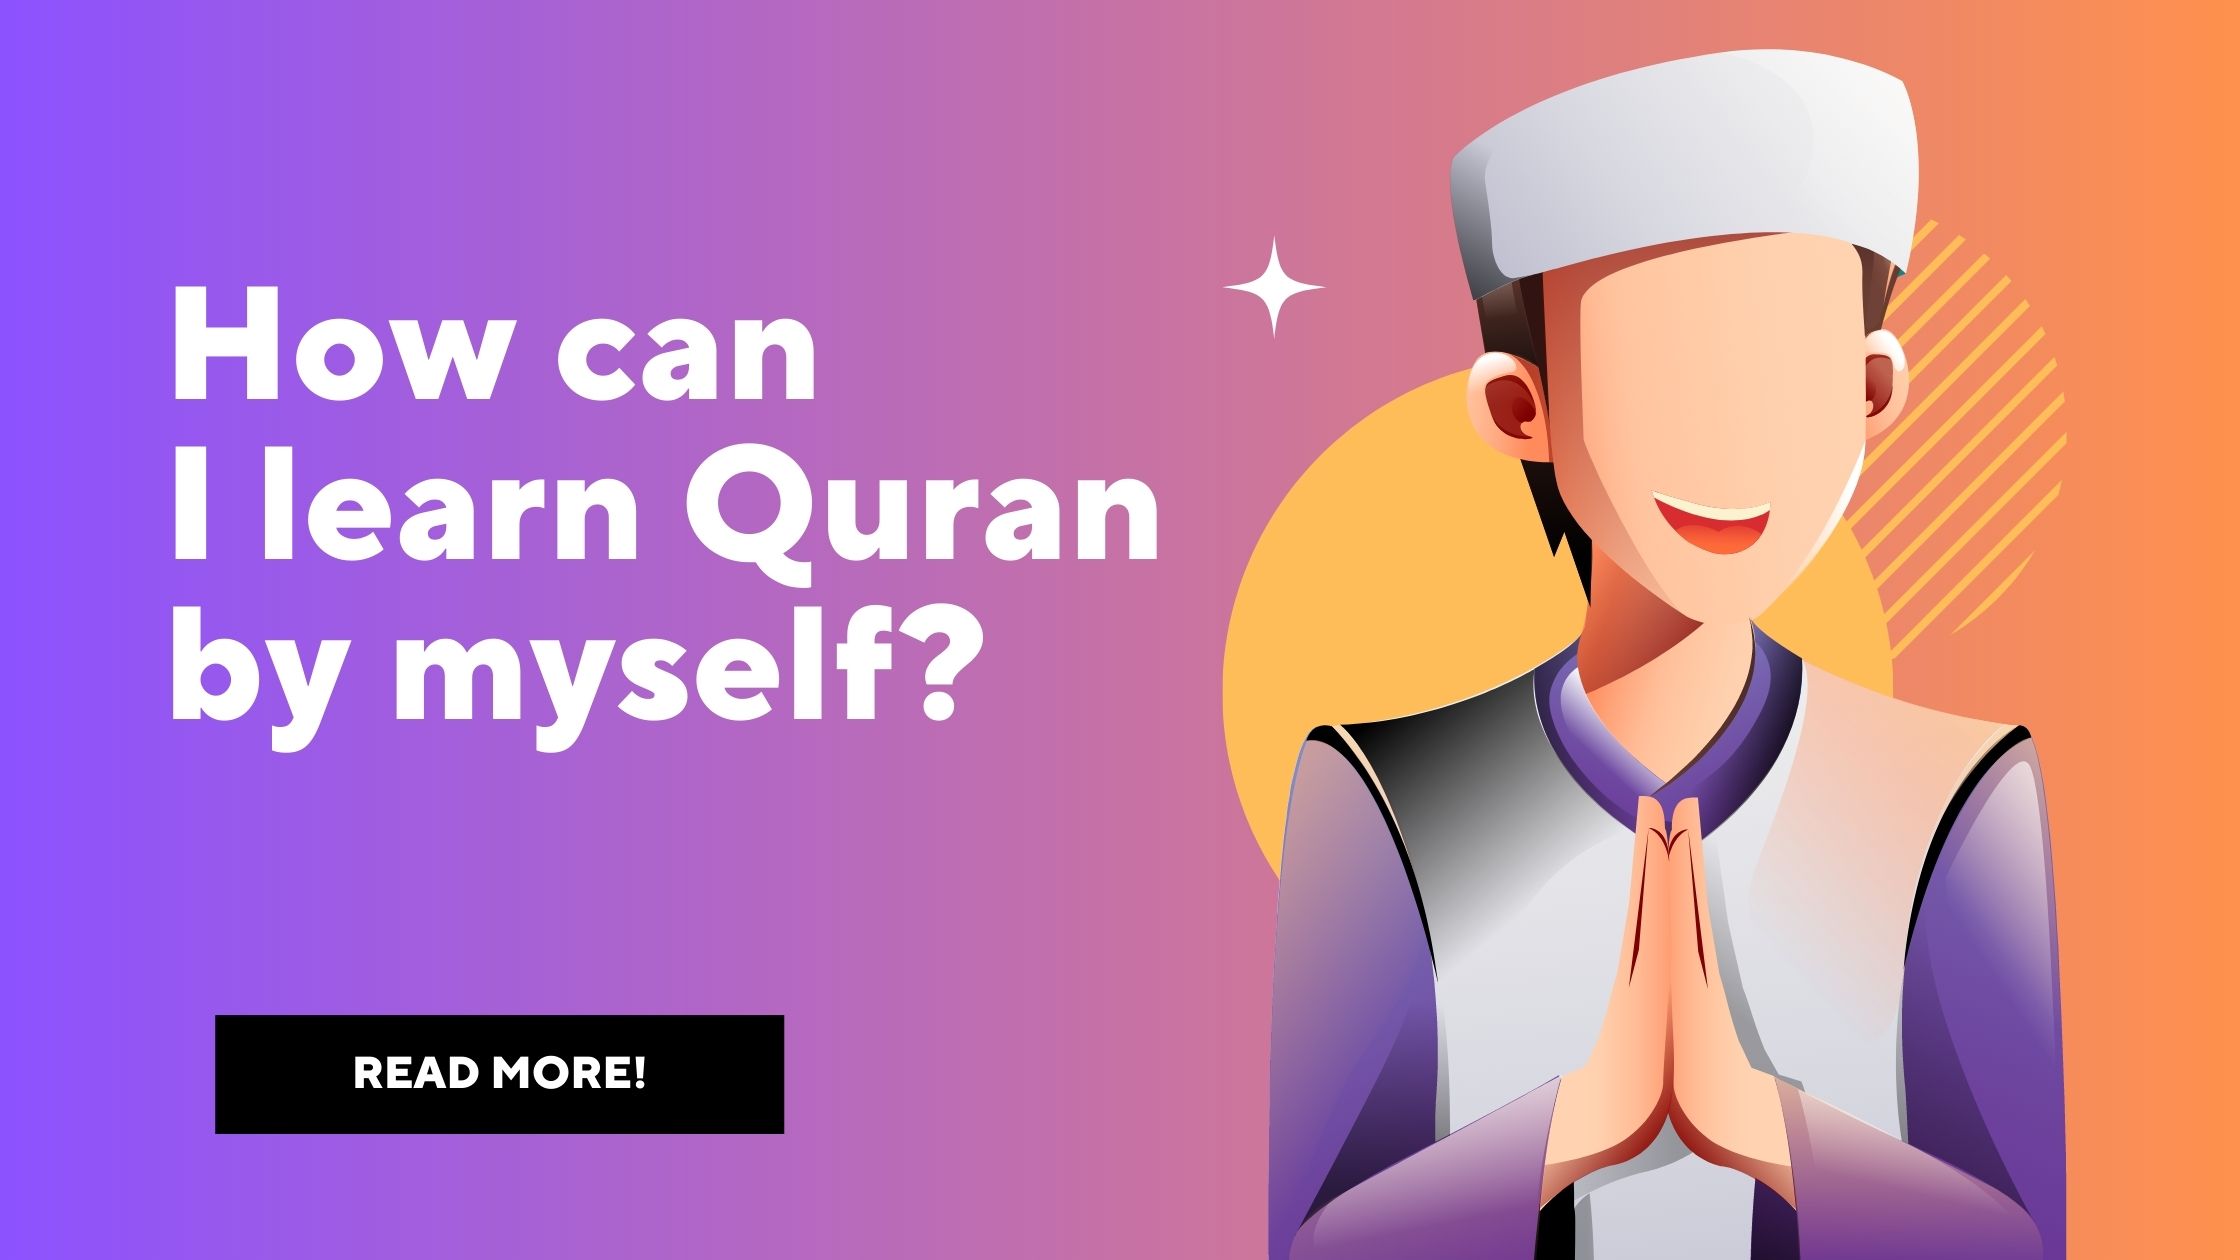 How can I learn Quran by myself